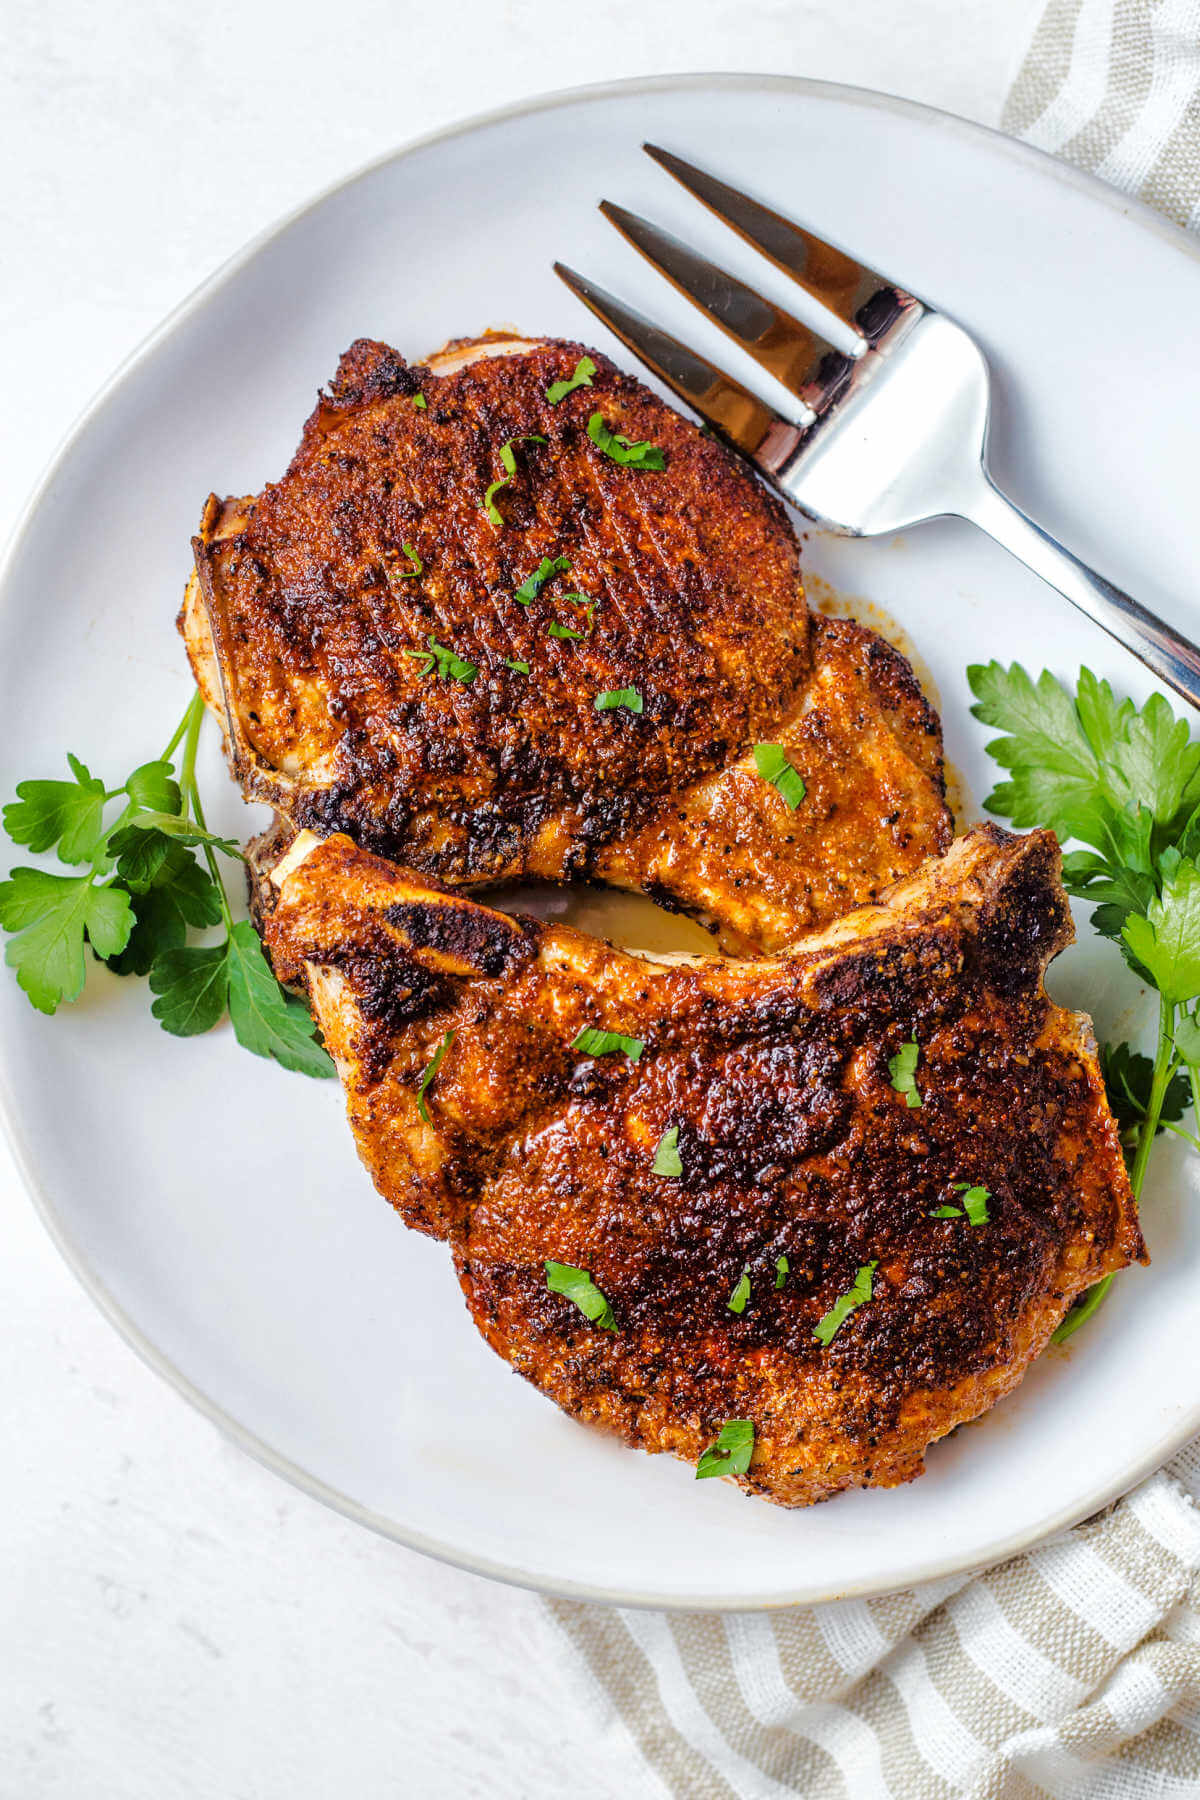 two pork chops on a white plate with a meat fork and garnished with fresh parsley on a table.